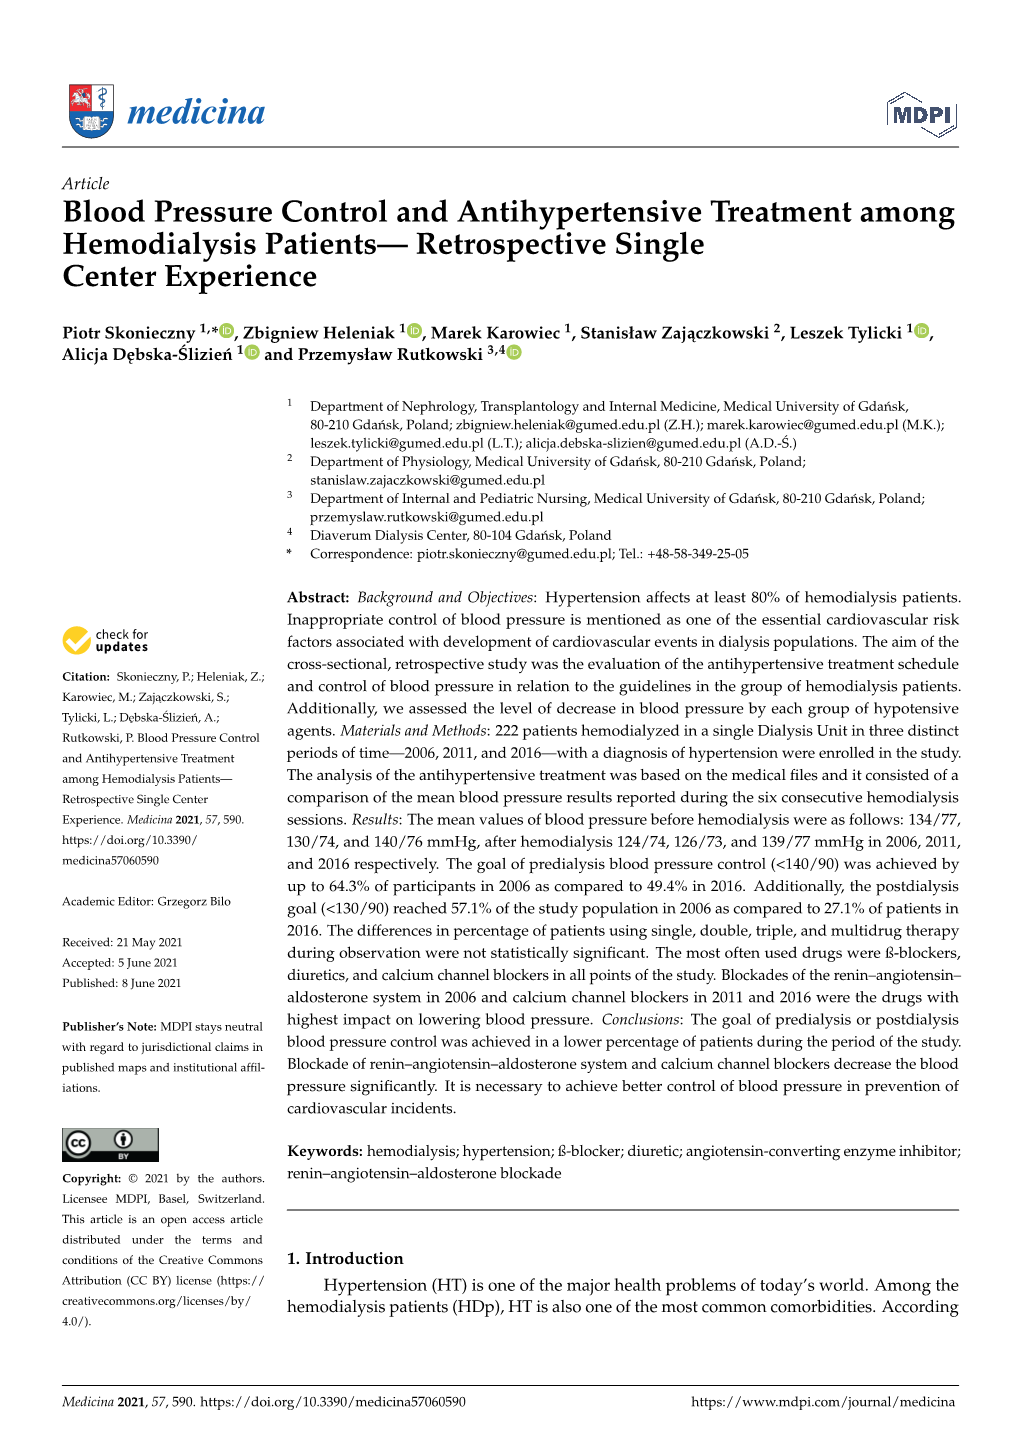 Blood Pressure Control and Antihypertensive Treatment Among Hemodialysis Patients— Retrospective Single Center Experience